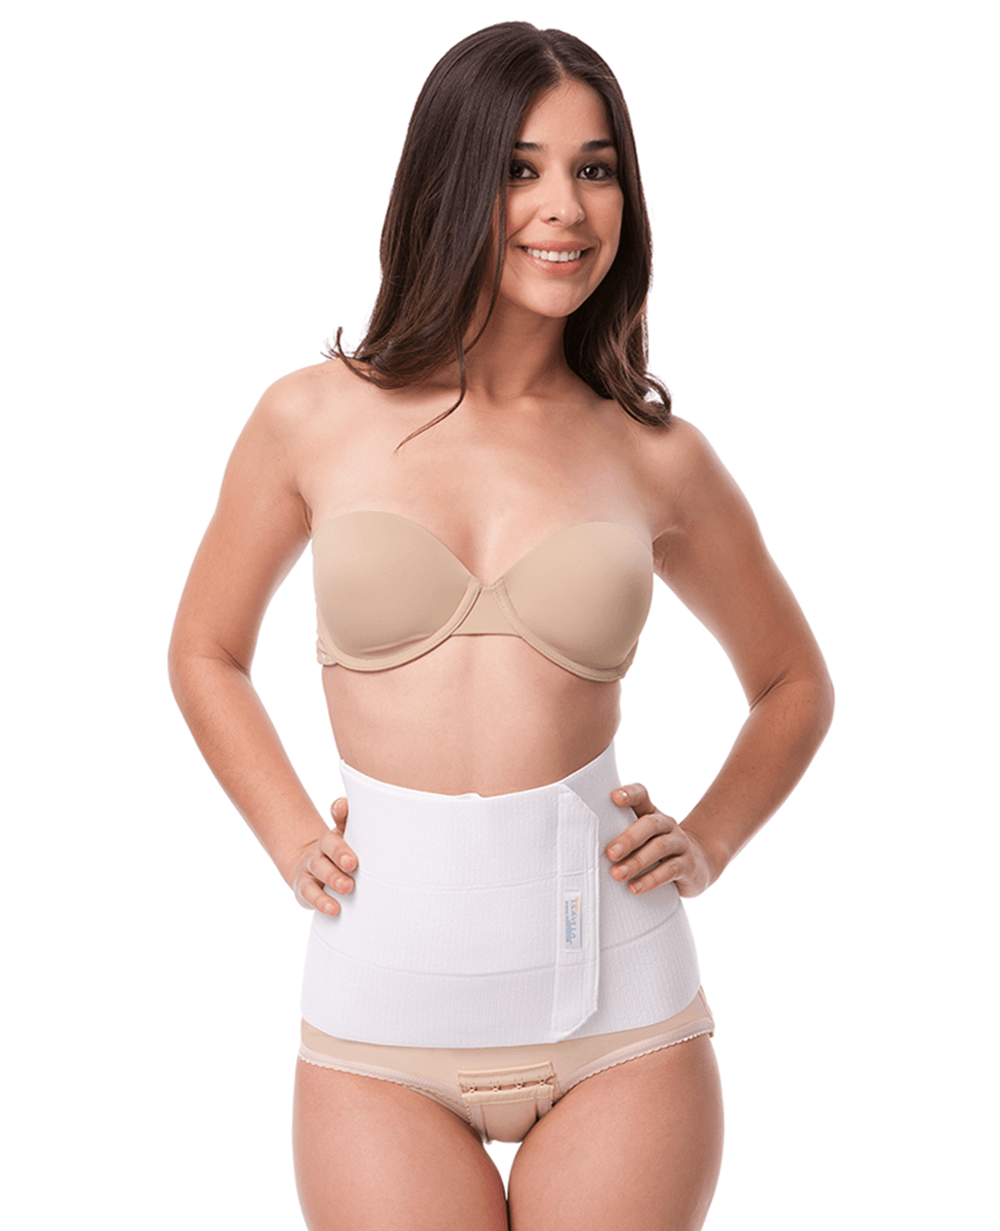 High Back Body Suit Off Center Front Hook and Eye Closure Panty Length